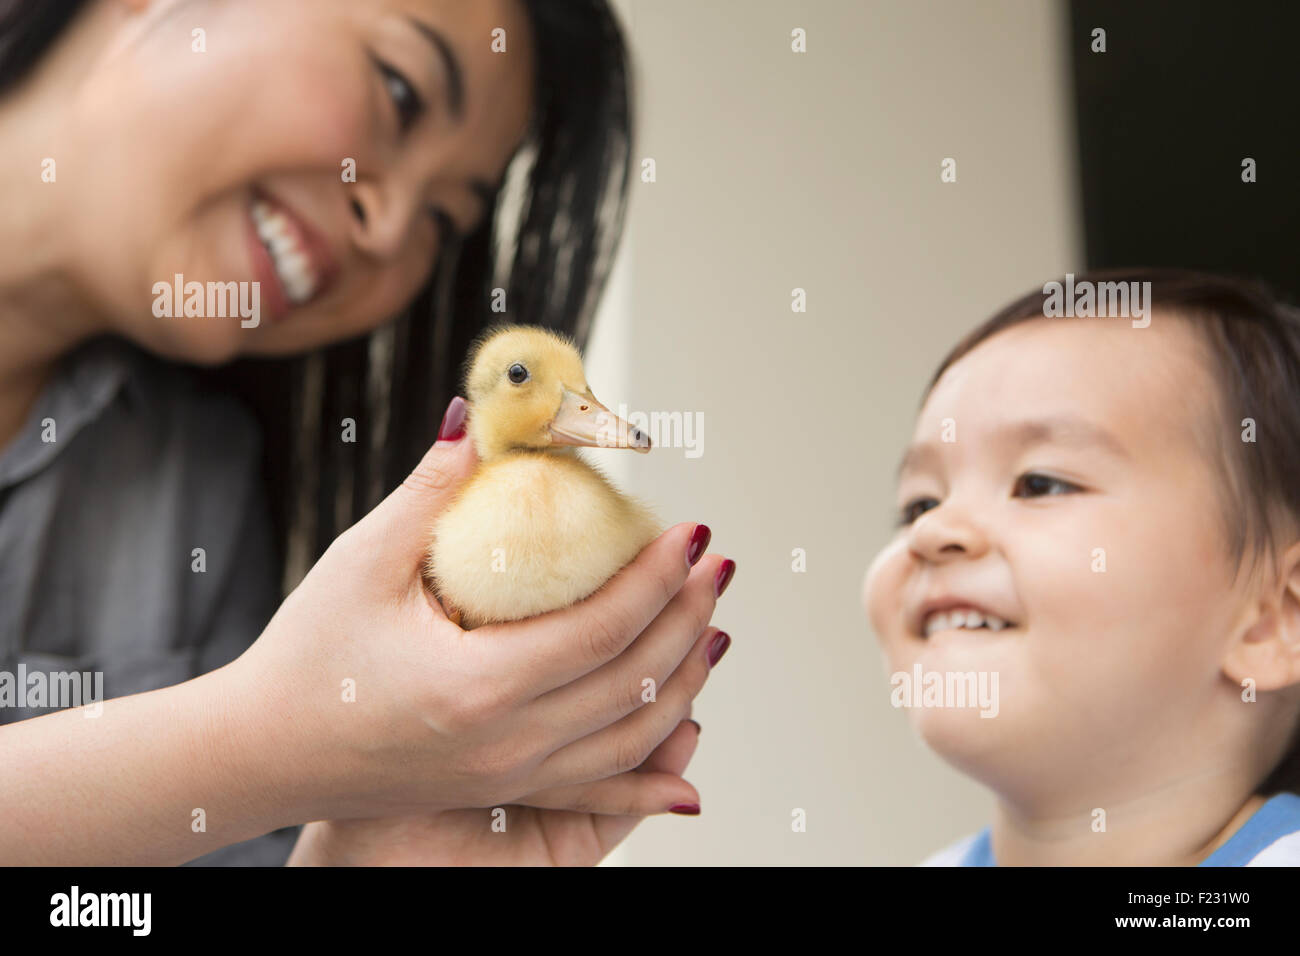 Smiling woman holding a yellow duckling in her hands, her young son watching. Stock Photo